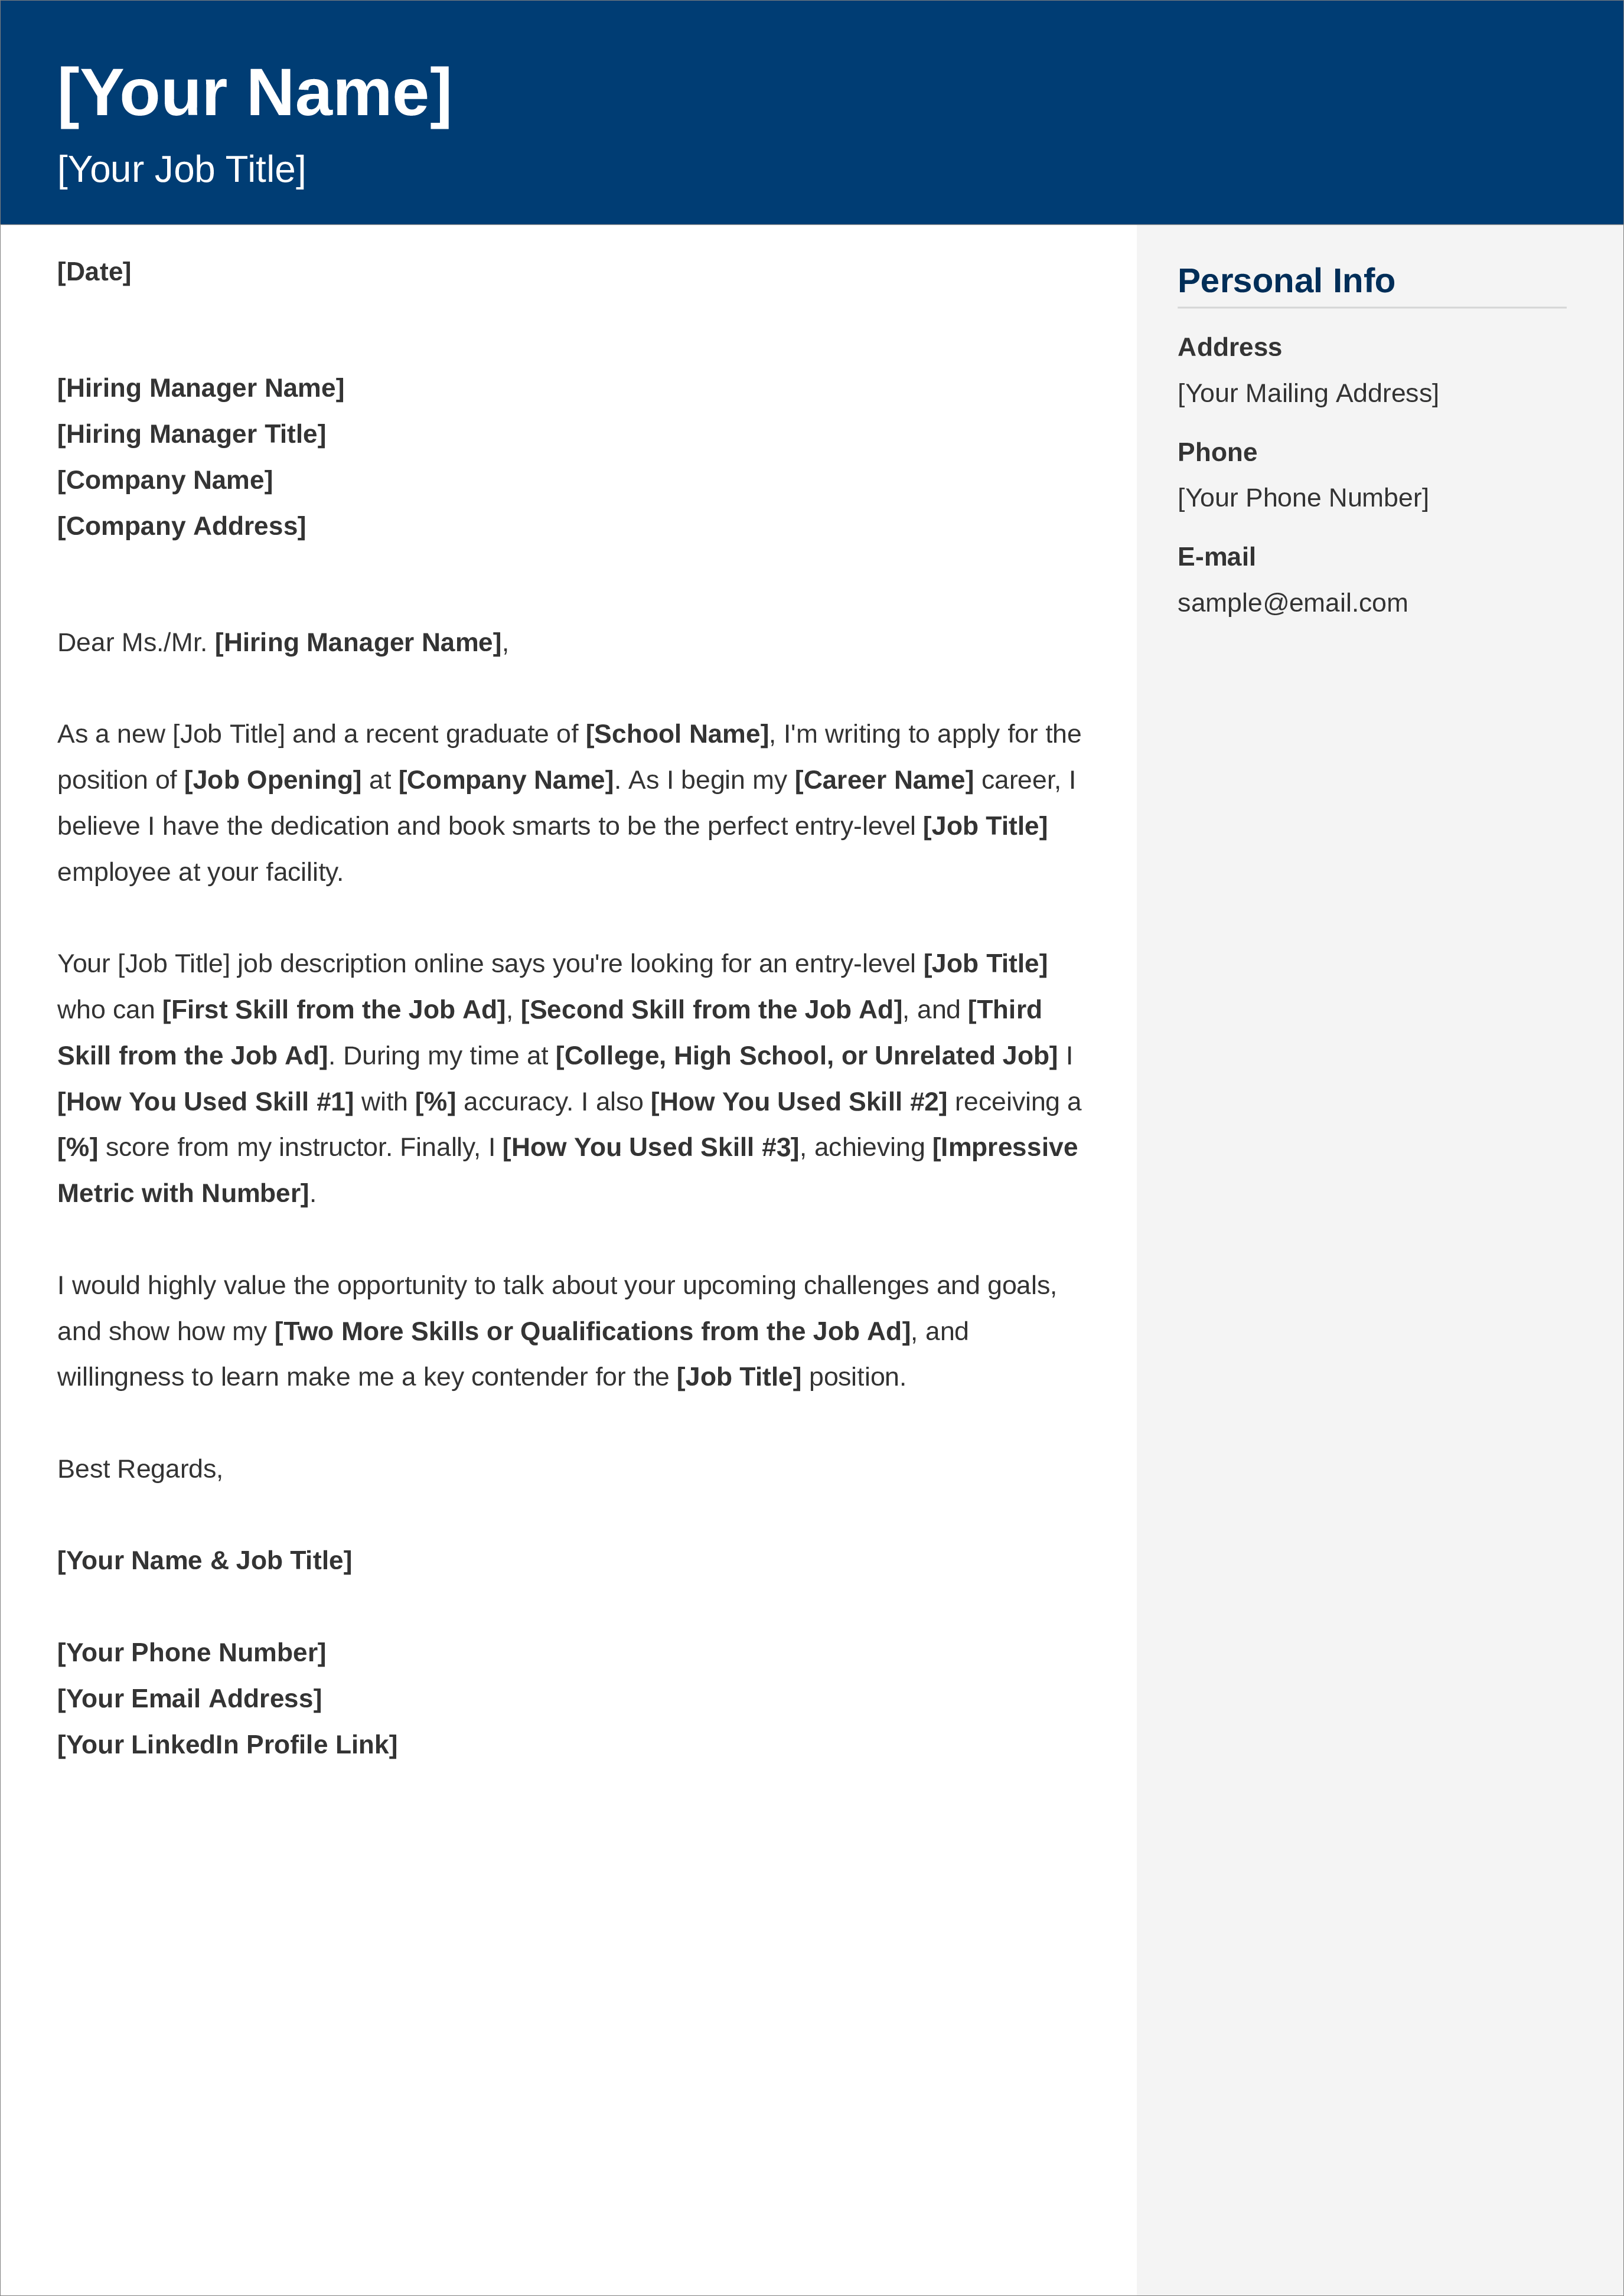 How To Make A General Cover Letter For A Resume - MasterYourResume.net